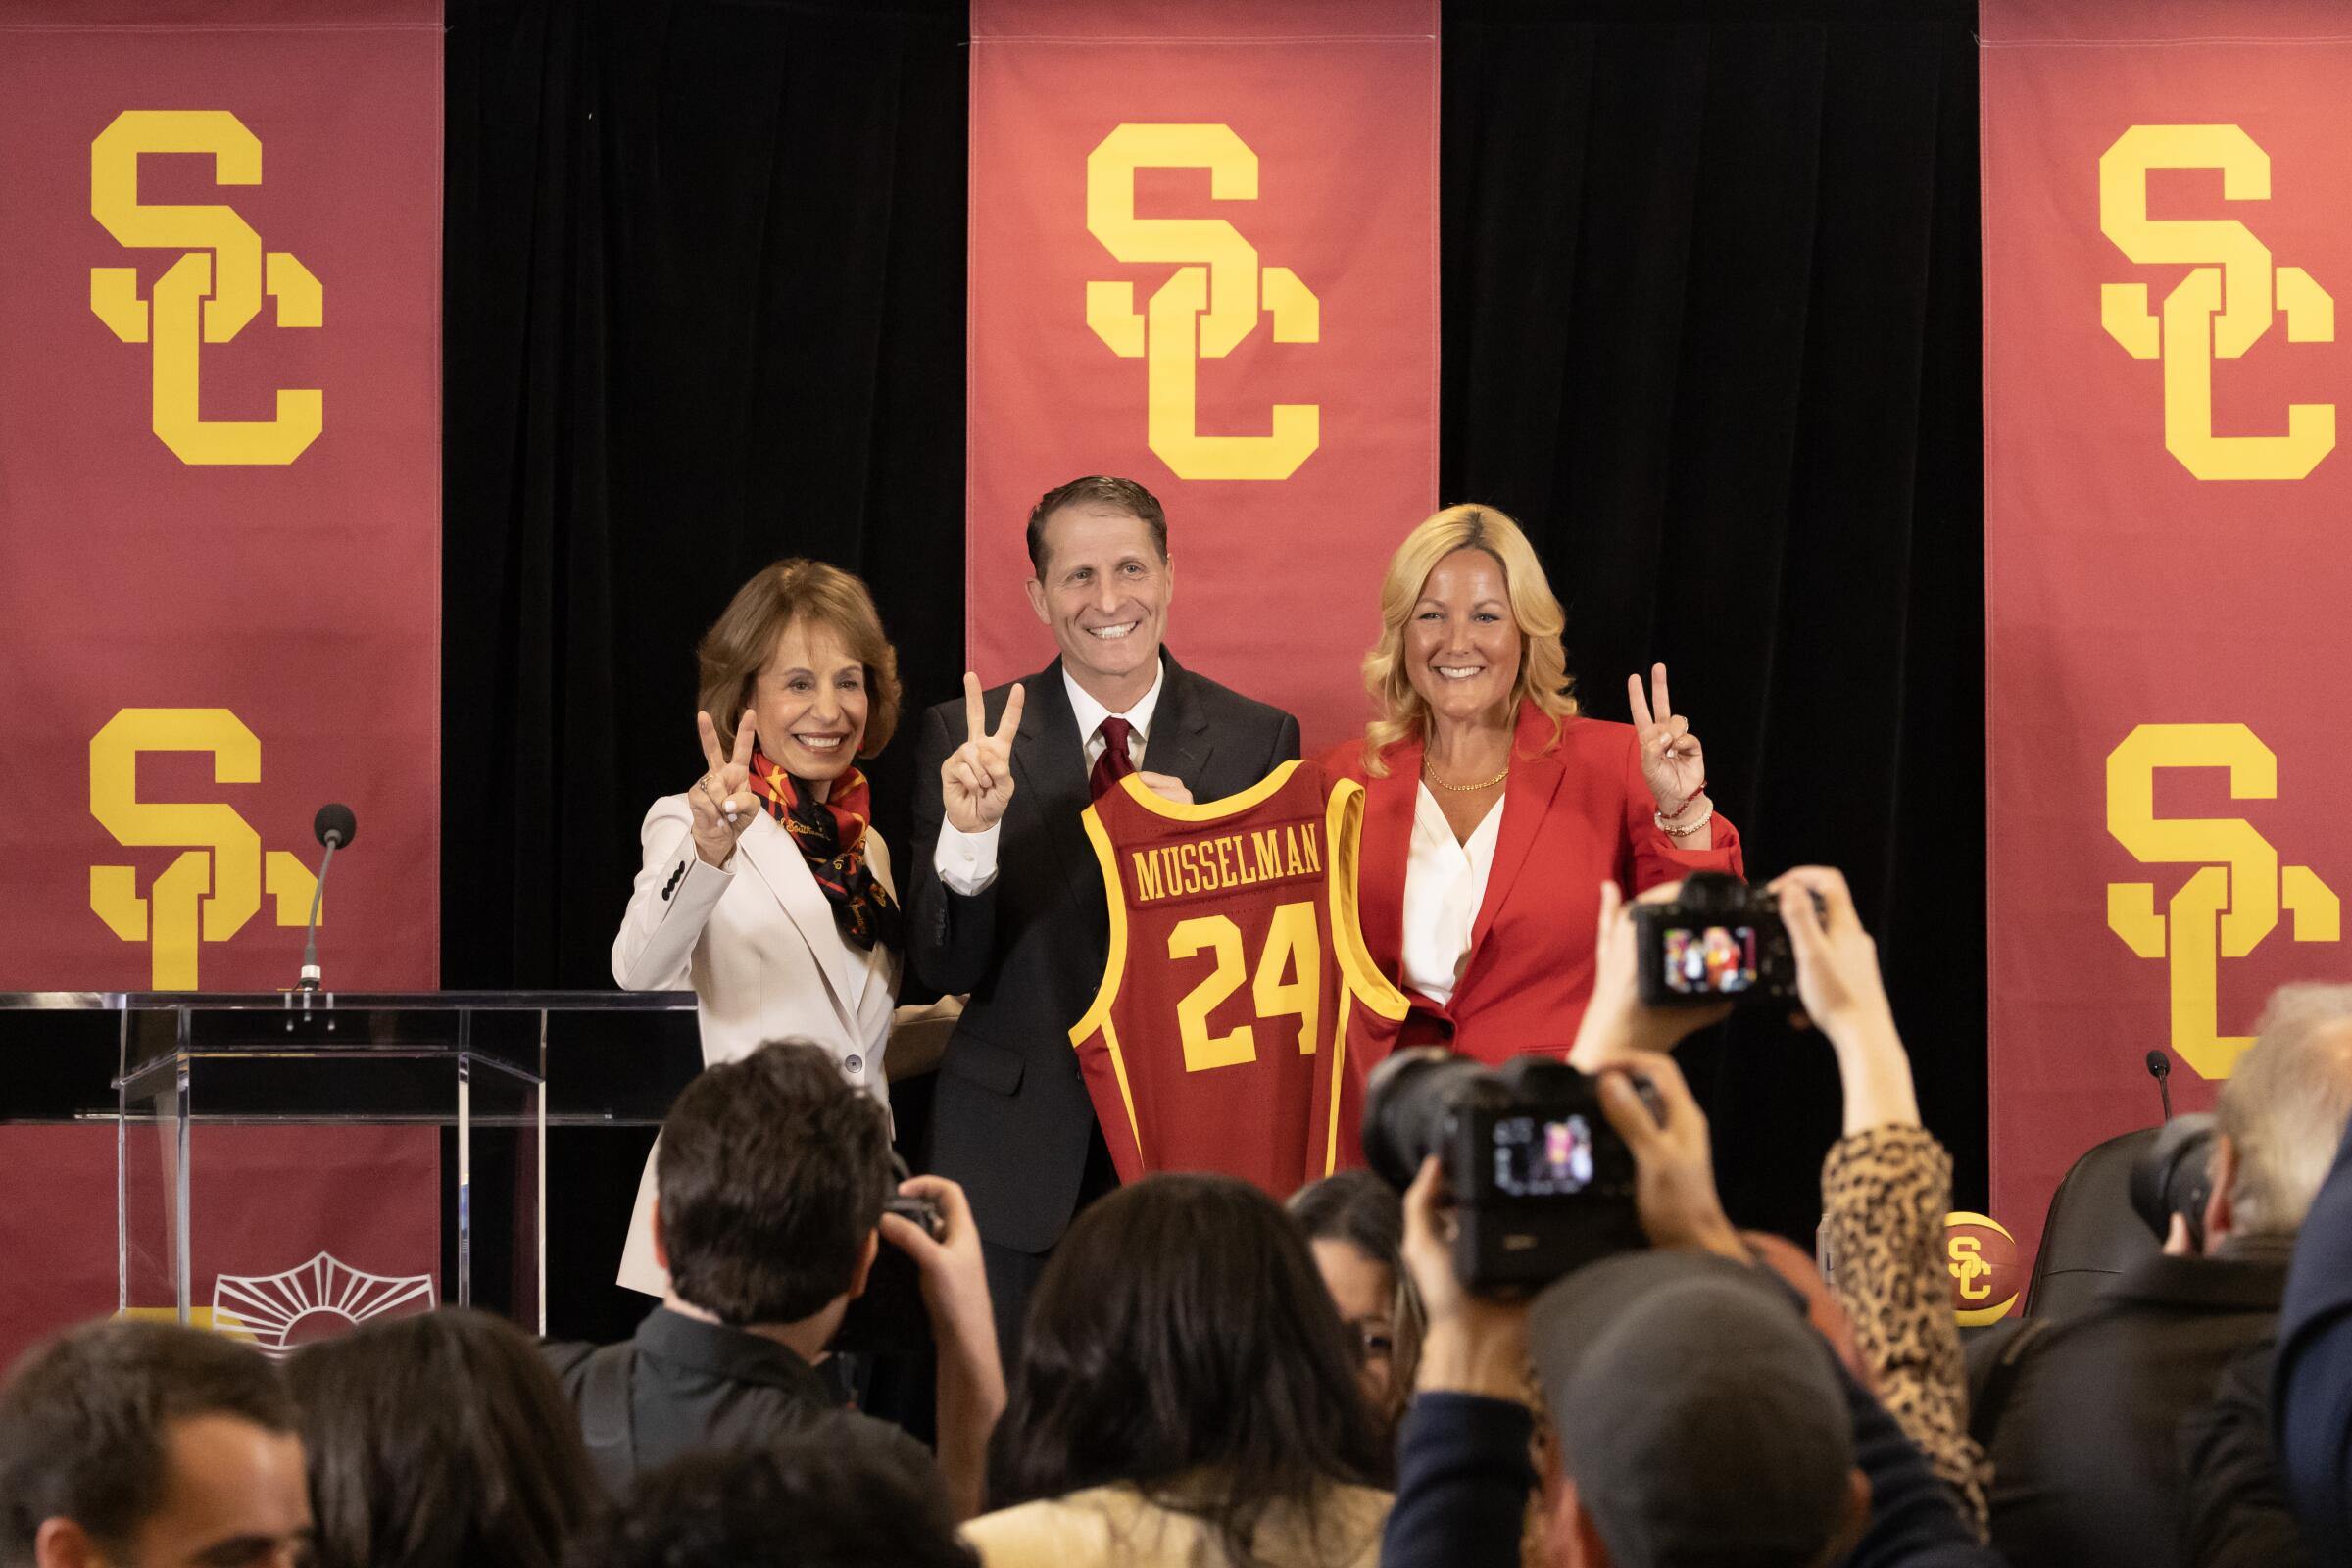 Eric Musselman holds a USC jersey while standing between USC president Carol Folt and athletic director Jennifer Cohen.